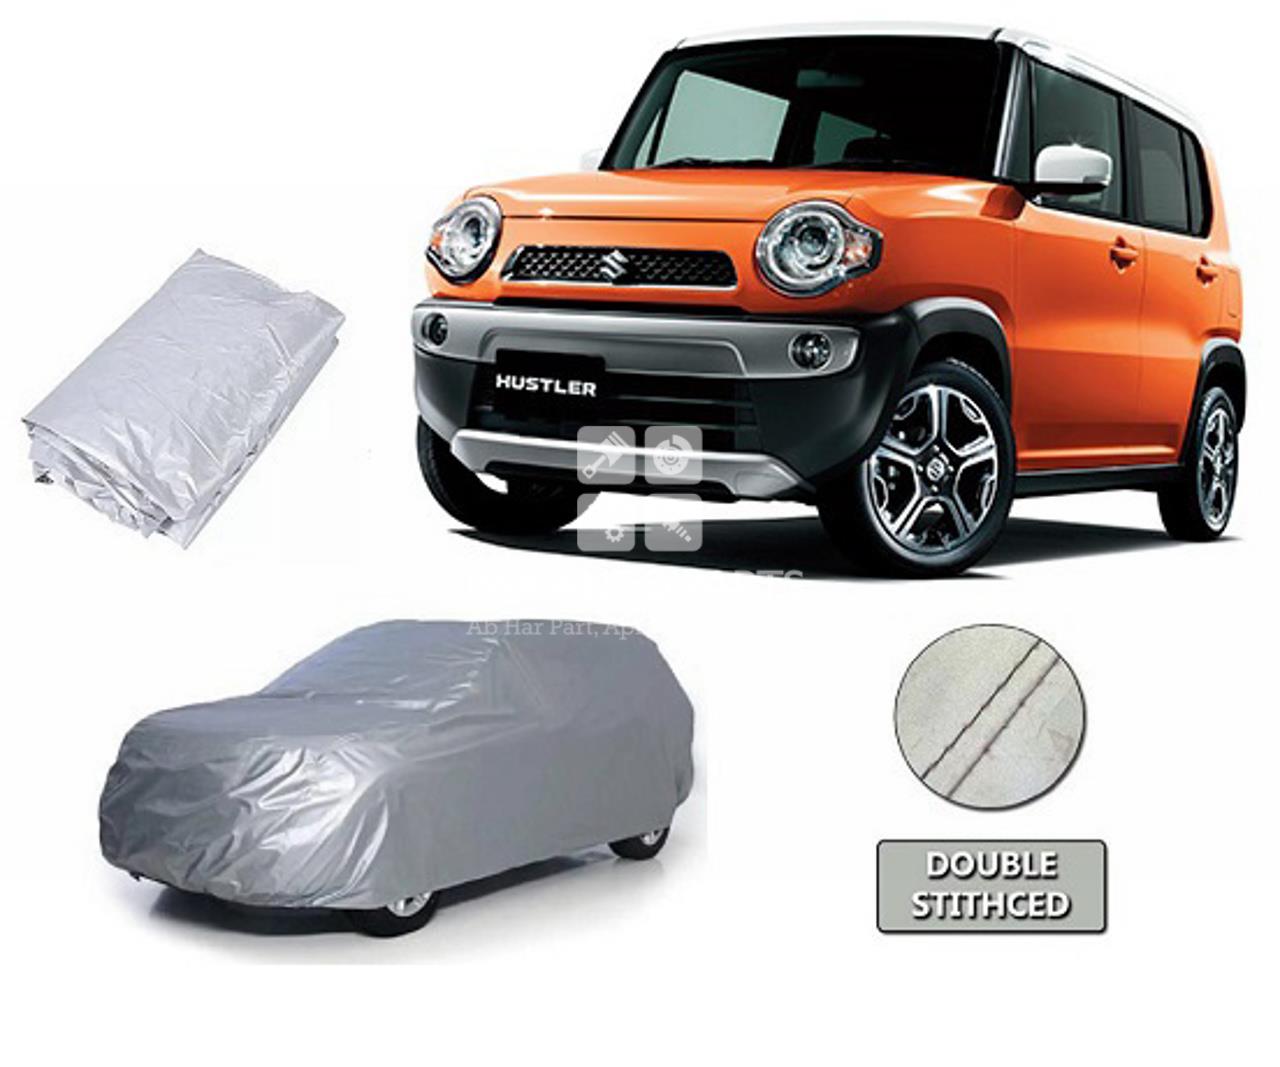 Picture of Suzuki Hustler Parachute | Silver Coated | Body Cover | Water, Dust & Heat Proof 100% | Double Stitched